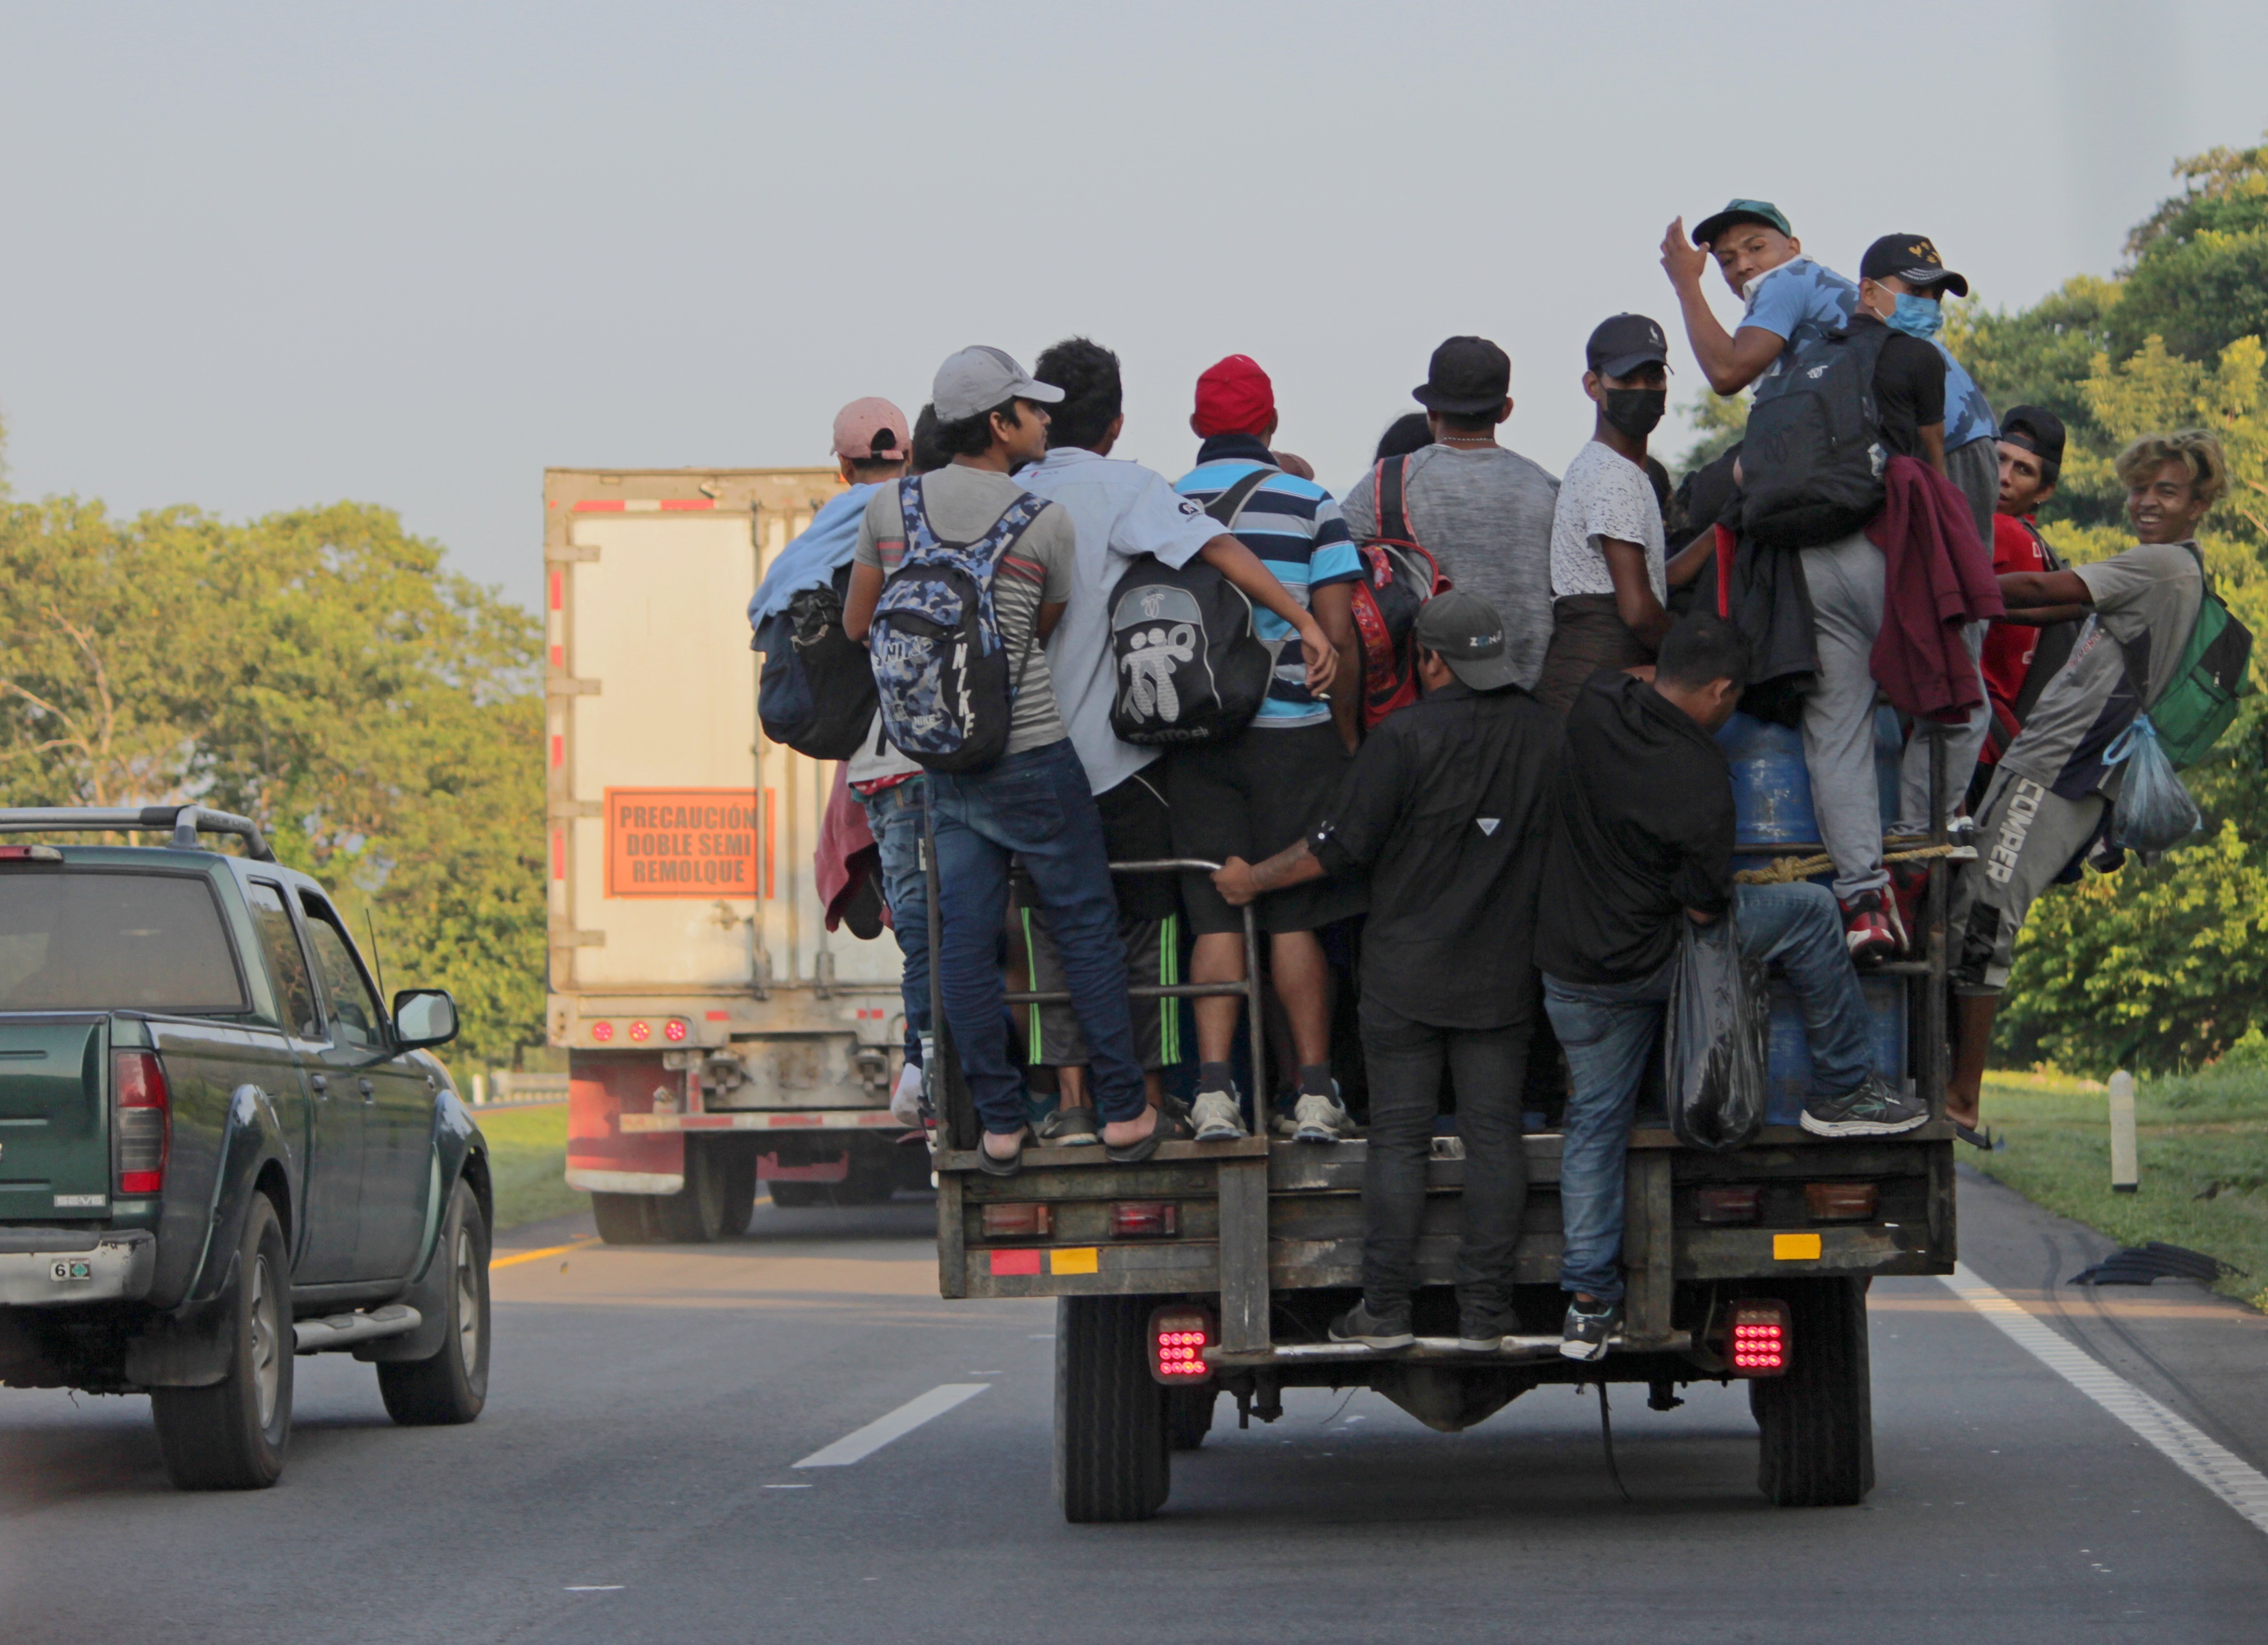 File photo showing a group of migrants traveling in a vehicle during a caravan heading to Mexico City, in the state of Chiapas, Mexico.  EFE / Juan Manuel Blanco